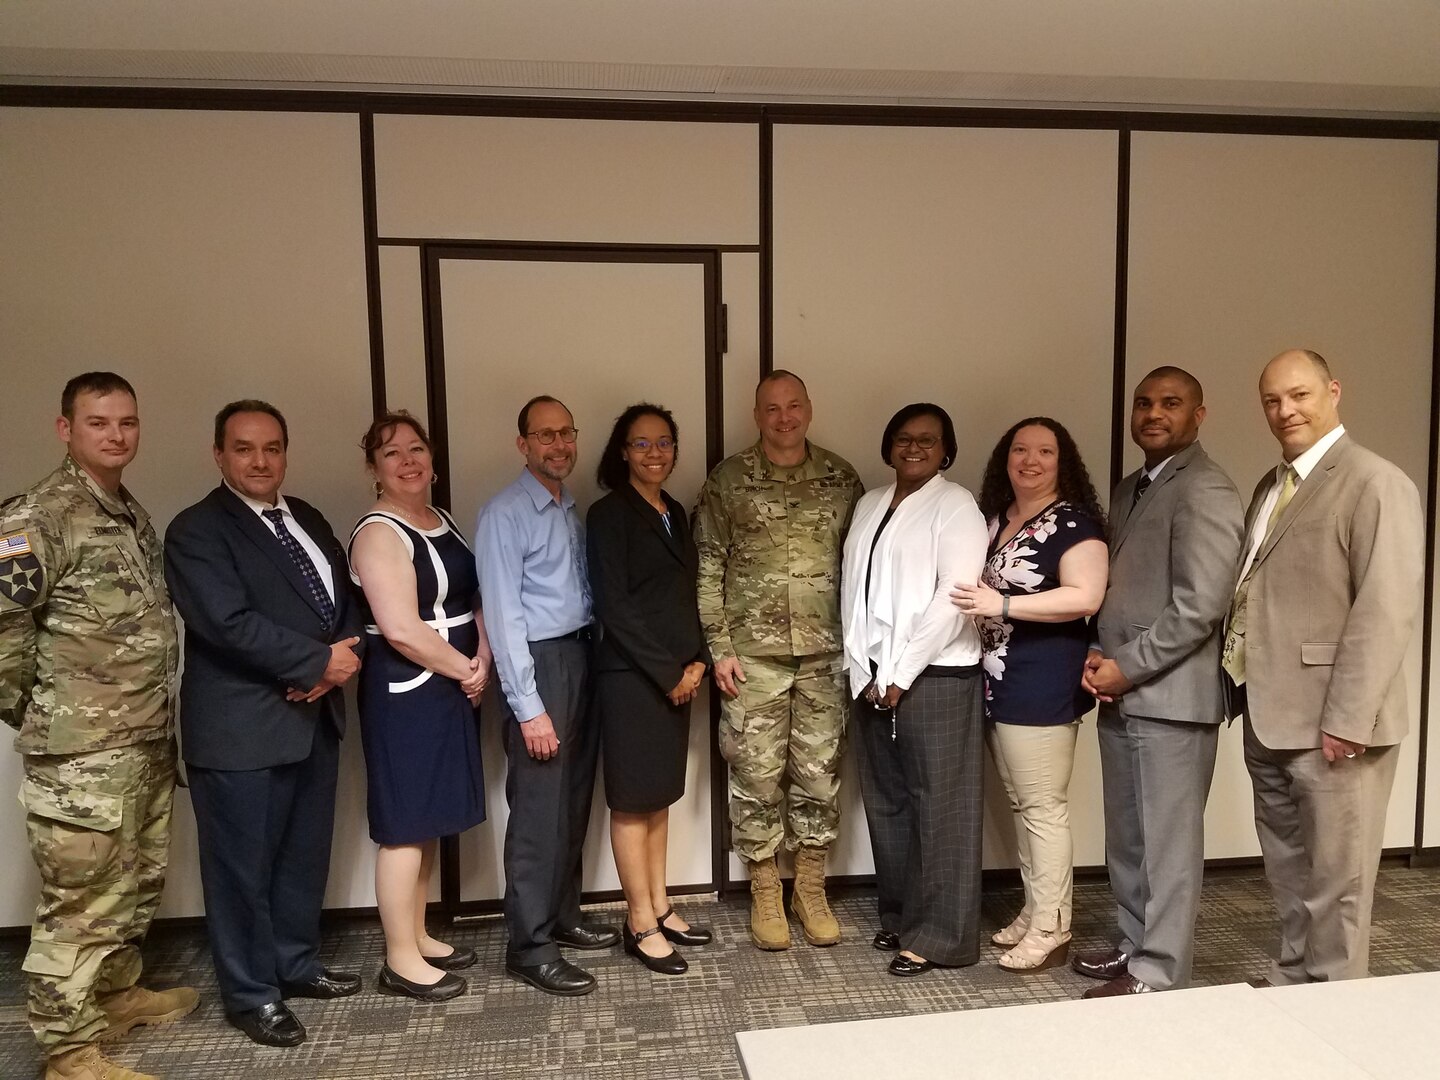 Group of Chaplain Liaisons pose for photo, military and civilian